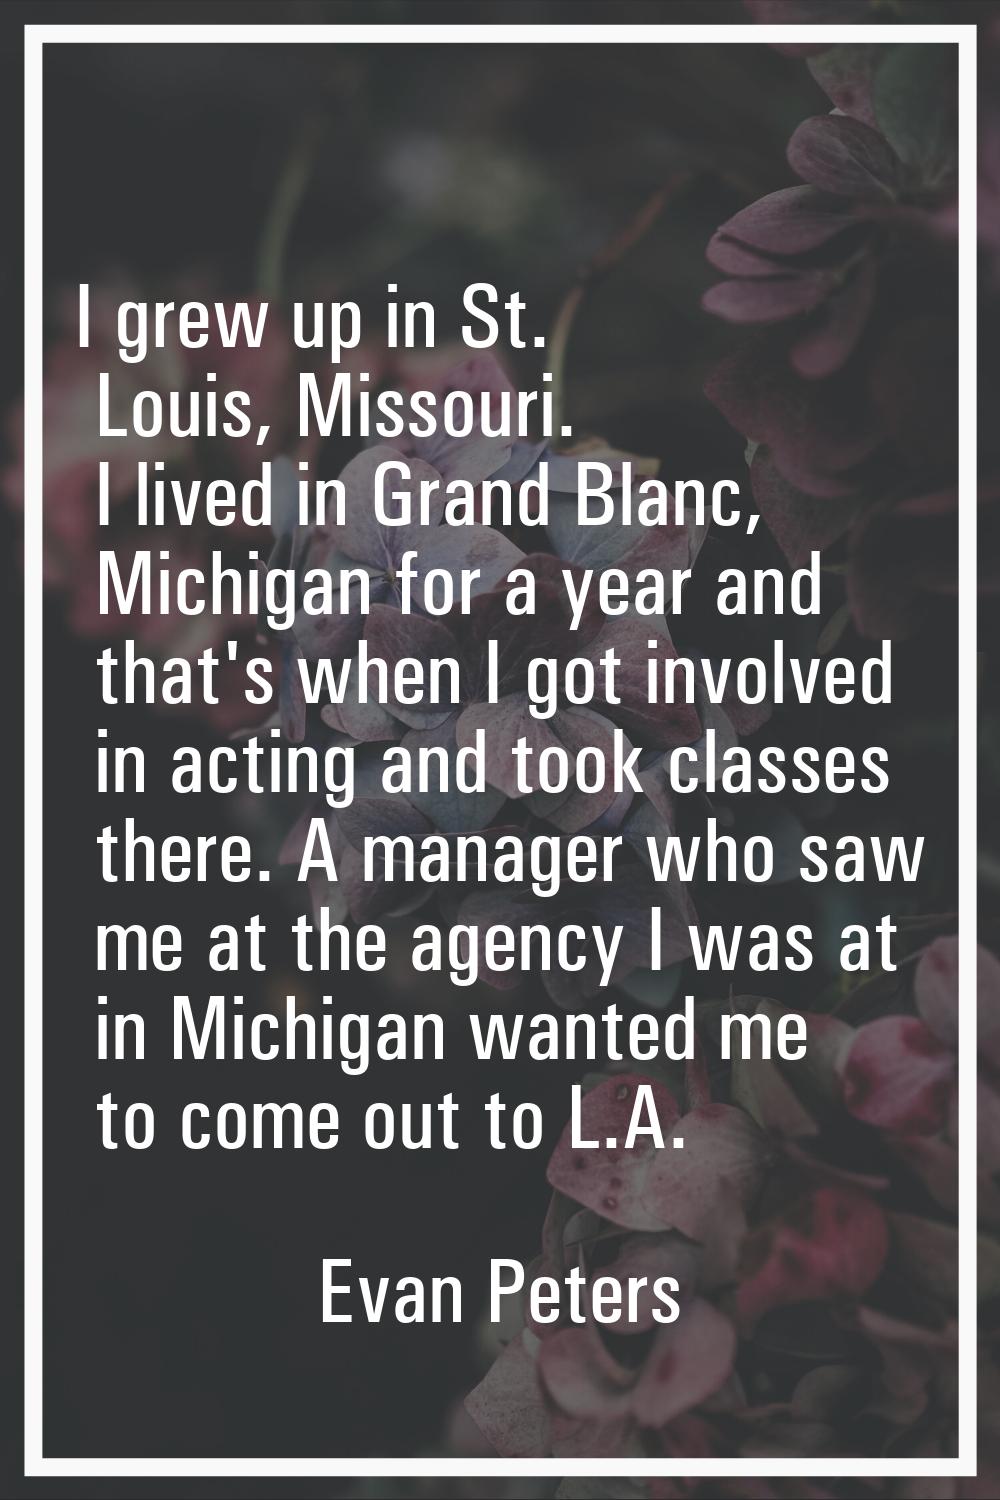 I grew up in St. Louis, Missouri. I lived in Grand Blanc, Michigan for a year and that's when I got